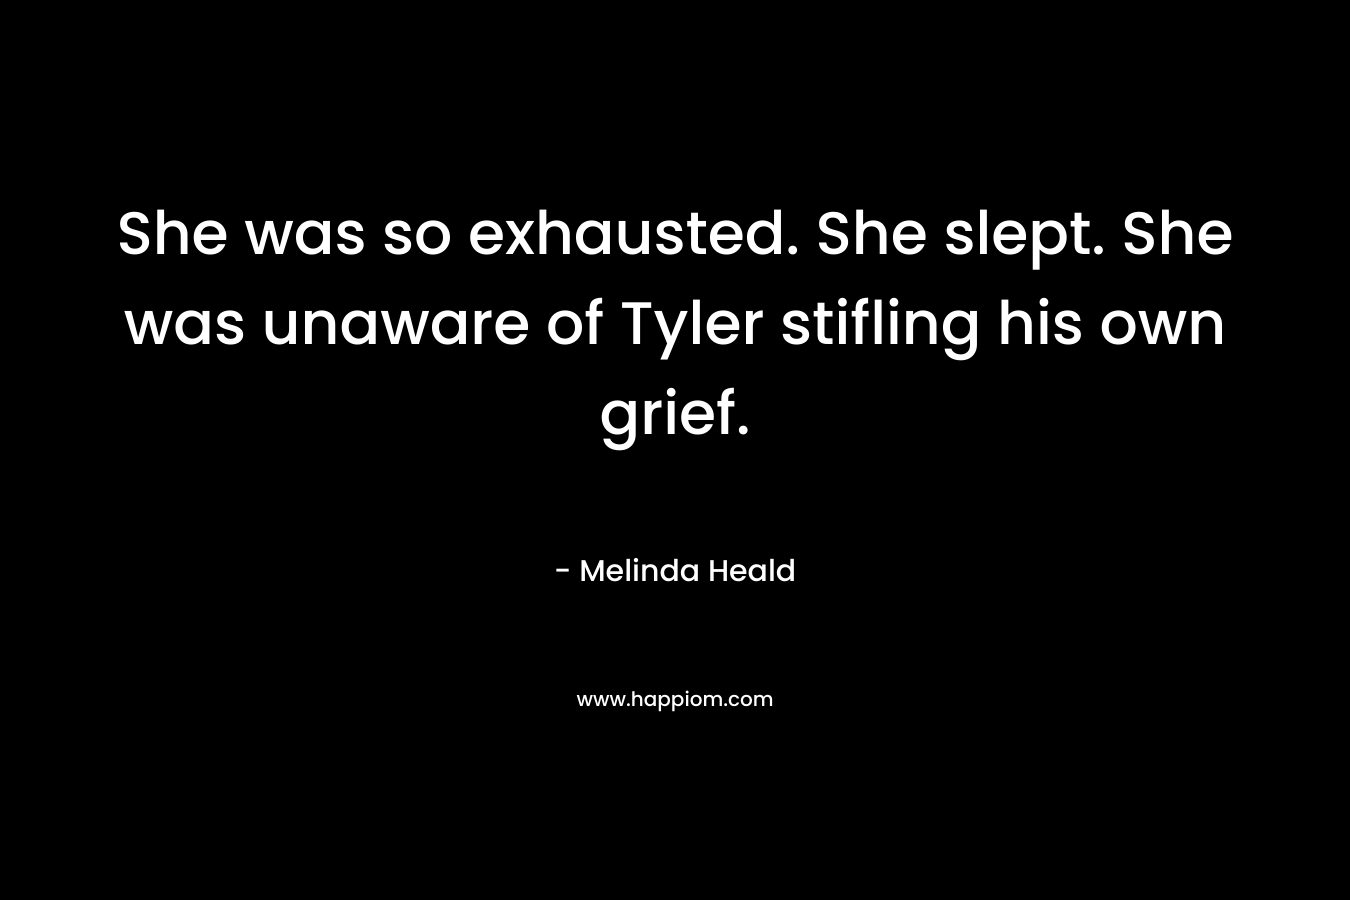 She was so exhausted. She slept. She was unaware of Tyler stifling his own grief. – Melinda Heald